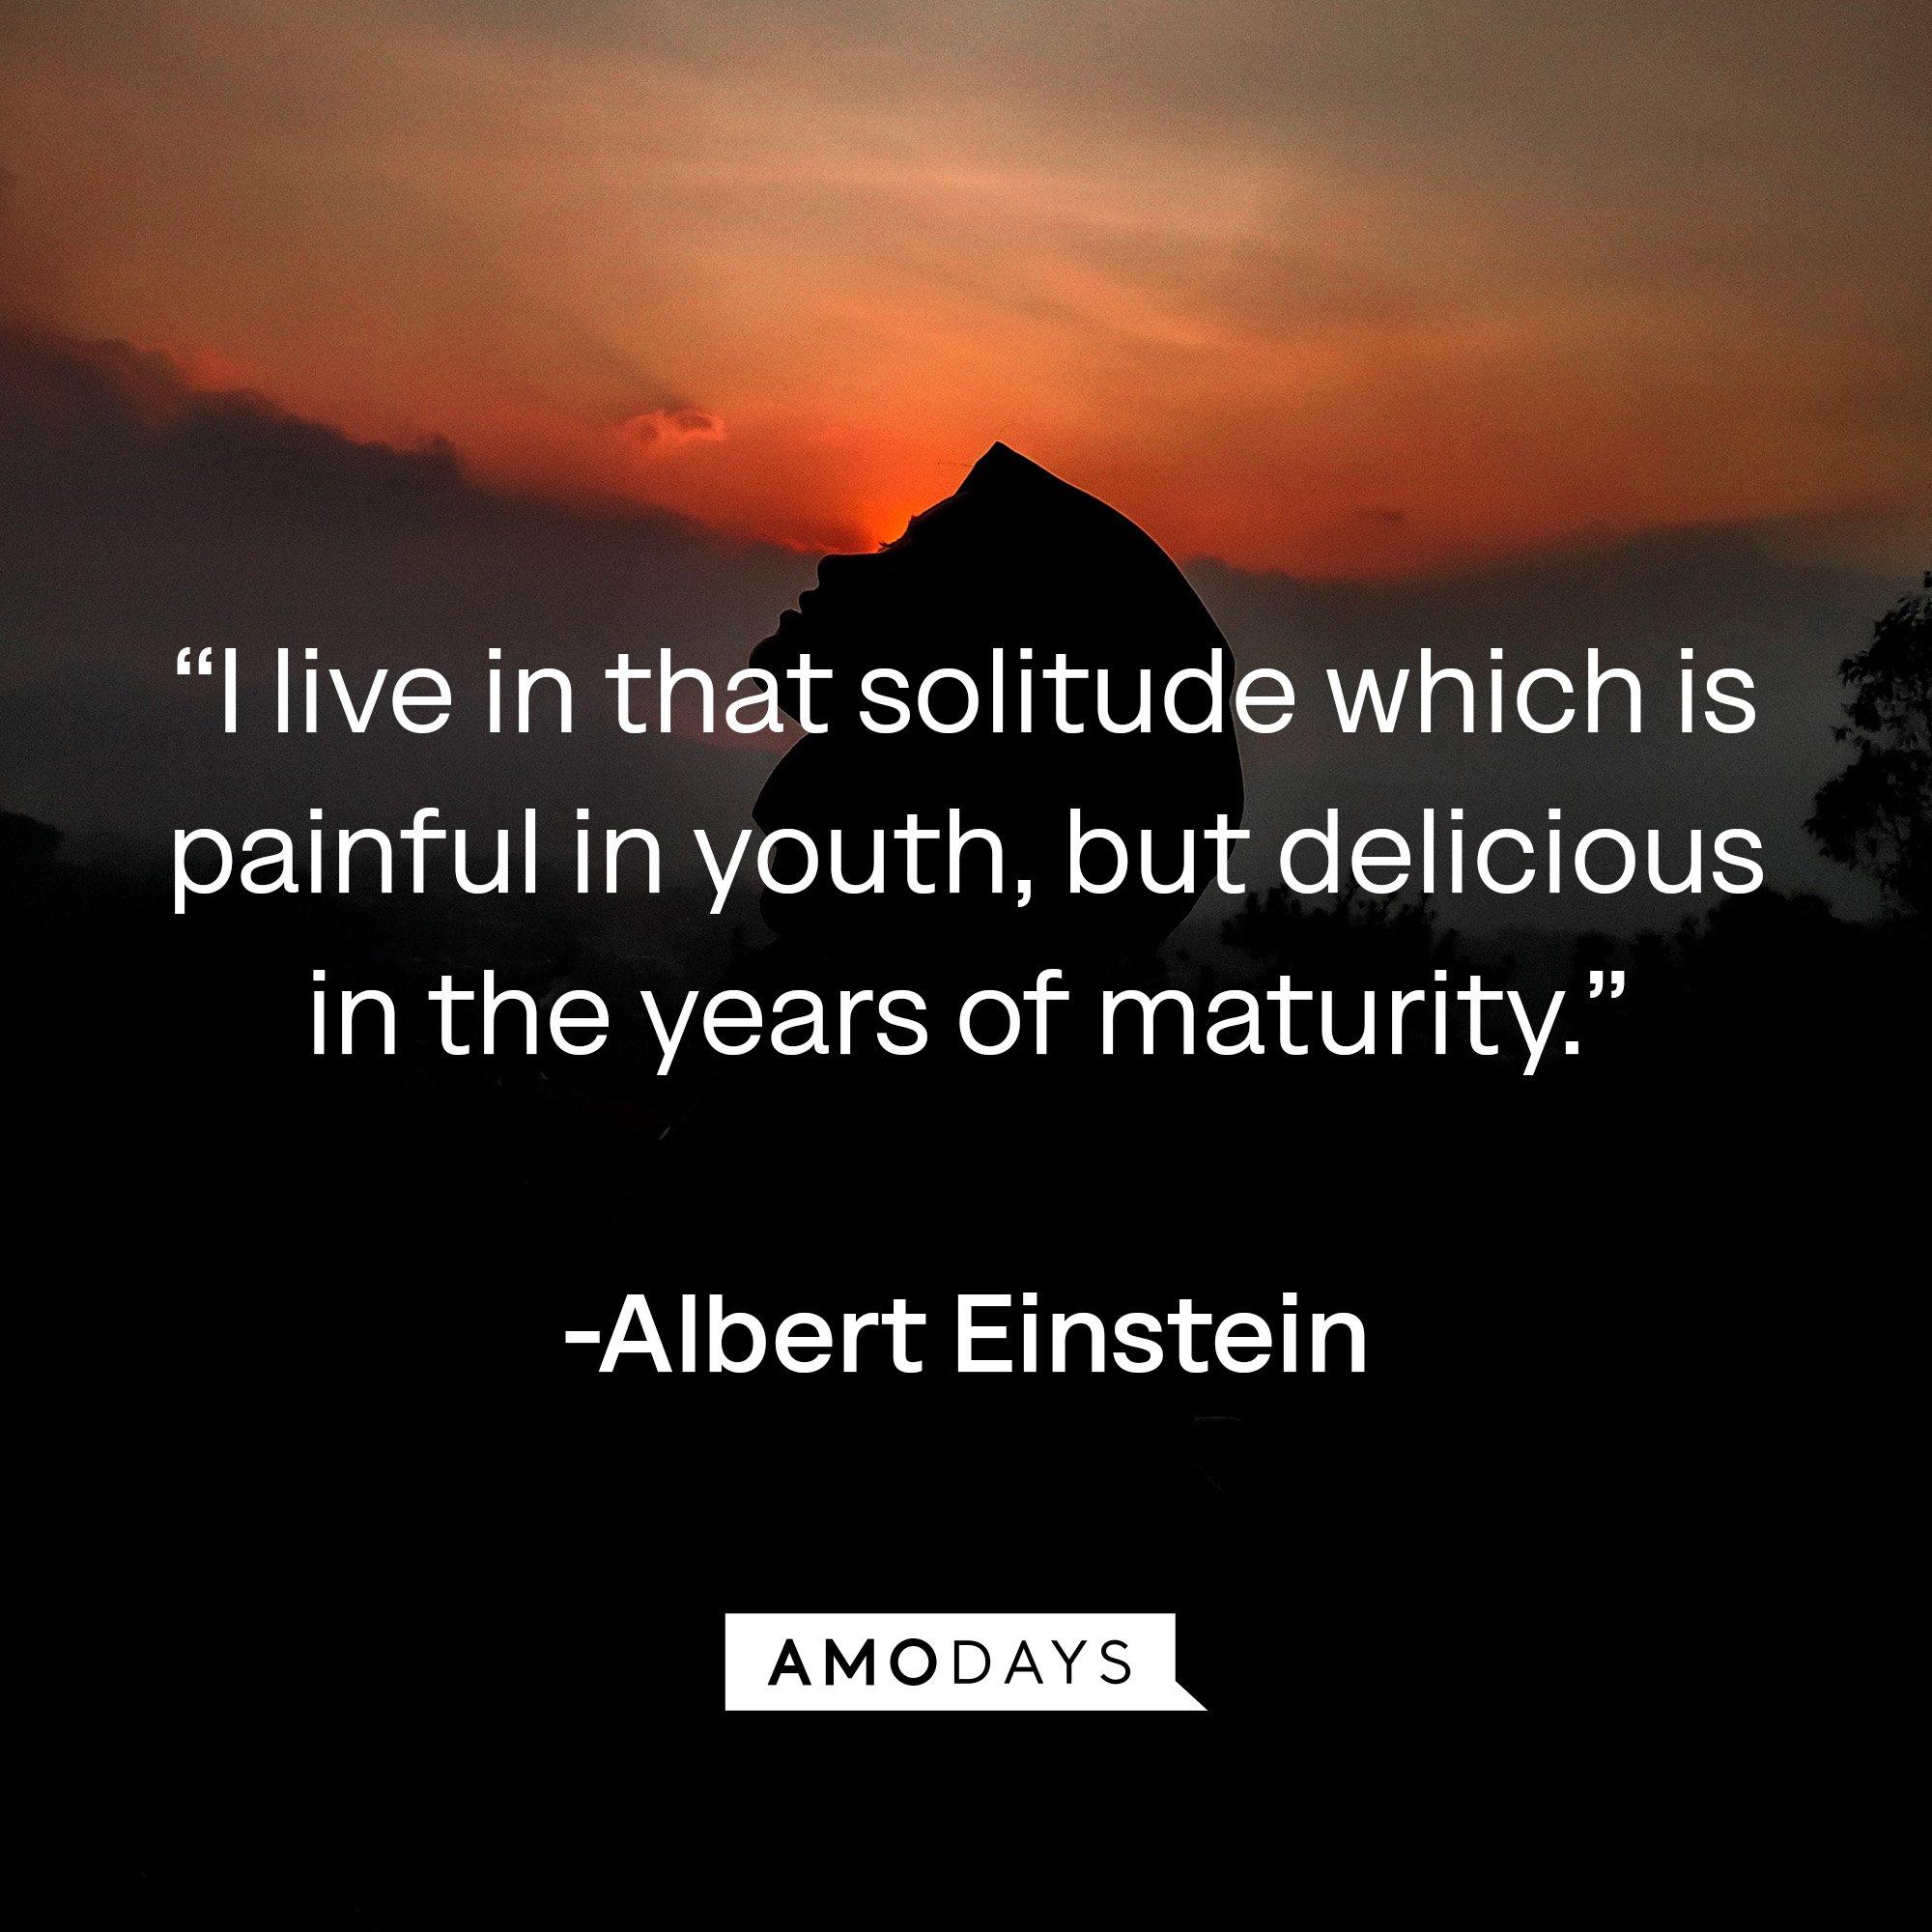 Albert Einstein’s quote:“I live in that solitude which is painful in youth, but delicious in the years of maturity.” | Image: Amodays